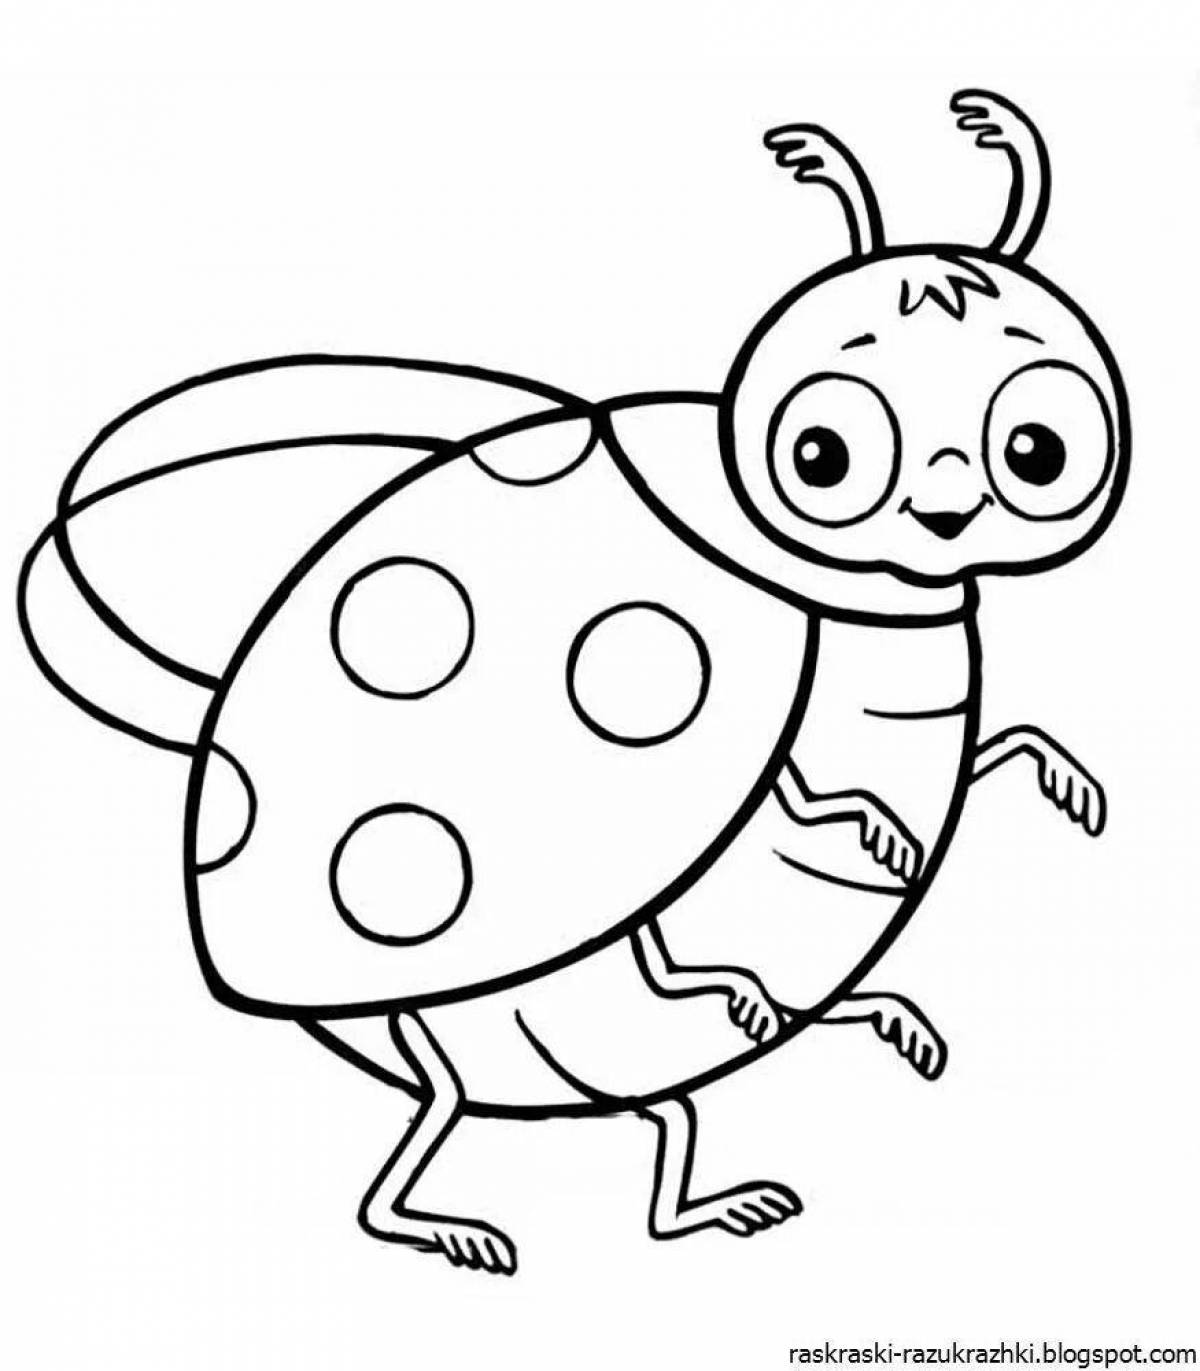 Insects playful coloring book